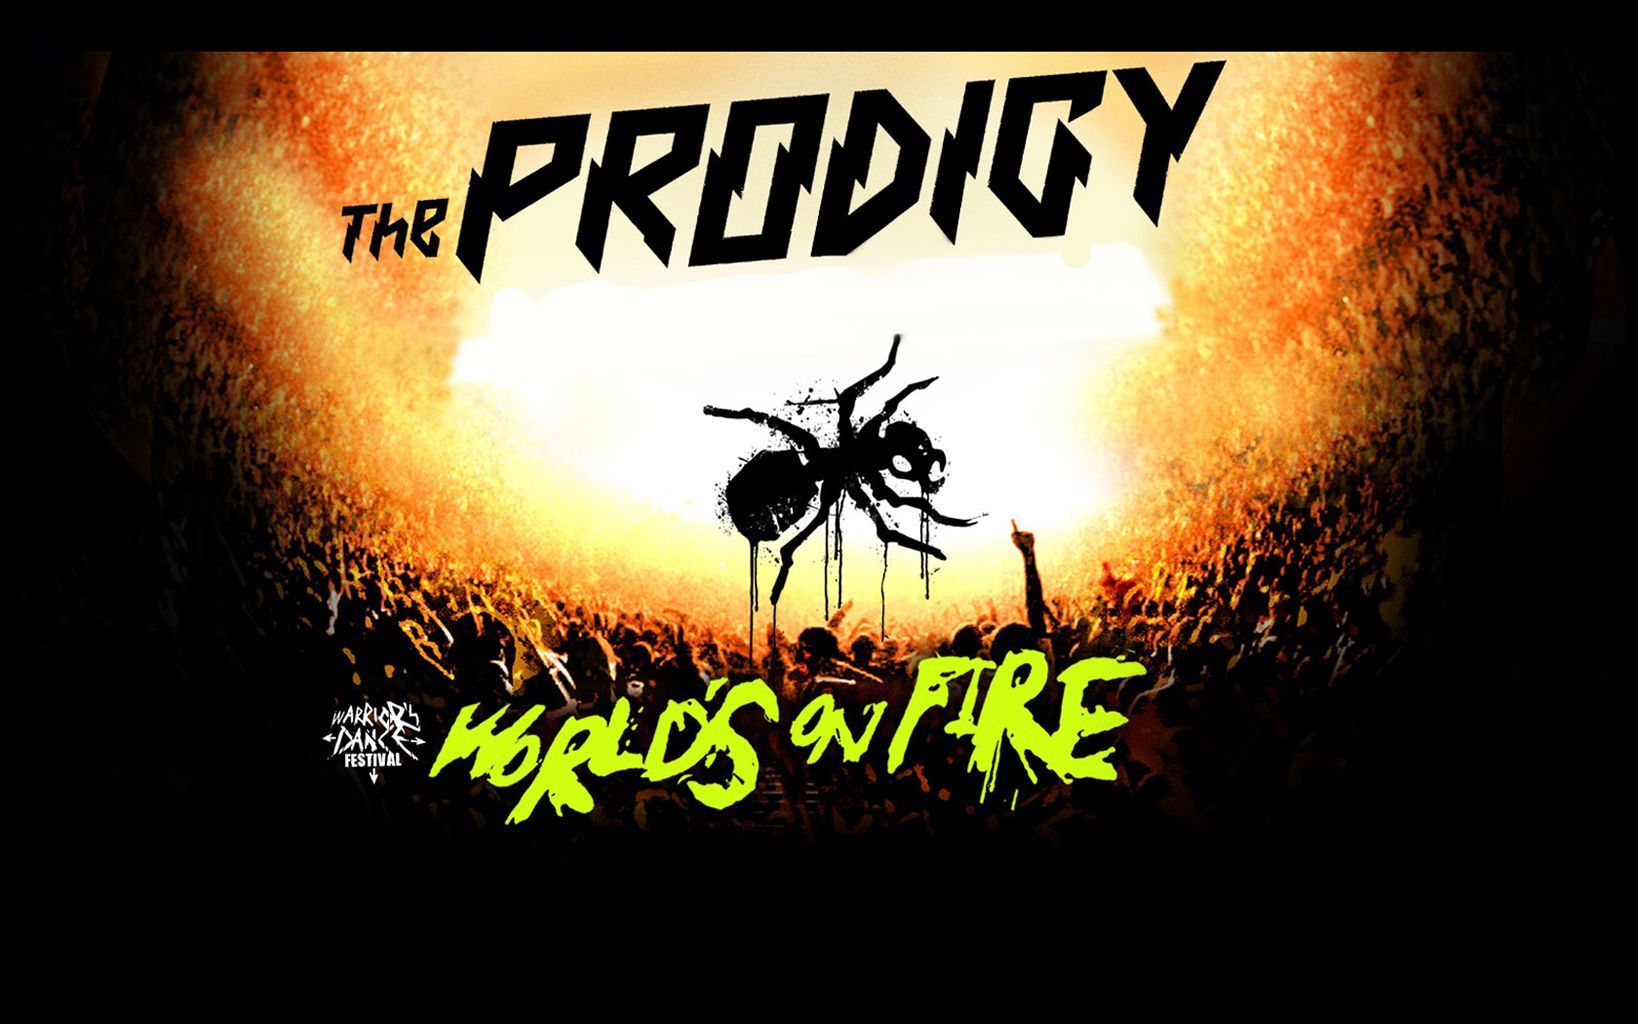 Fan Made The Prodigy Wallpaper by Maikel 001 | The Prodigy Fanboy ...